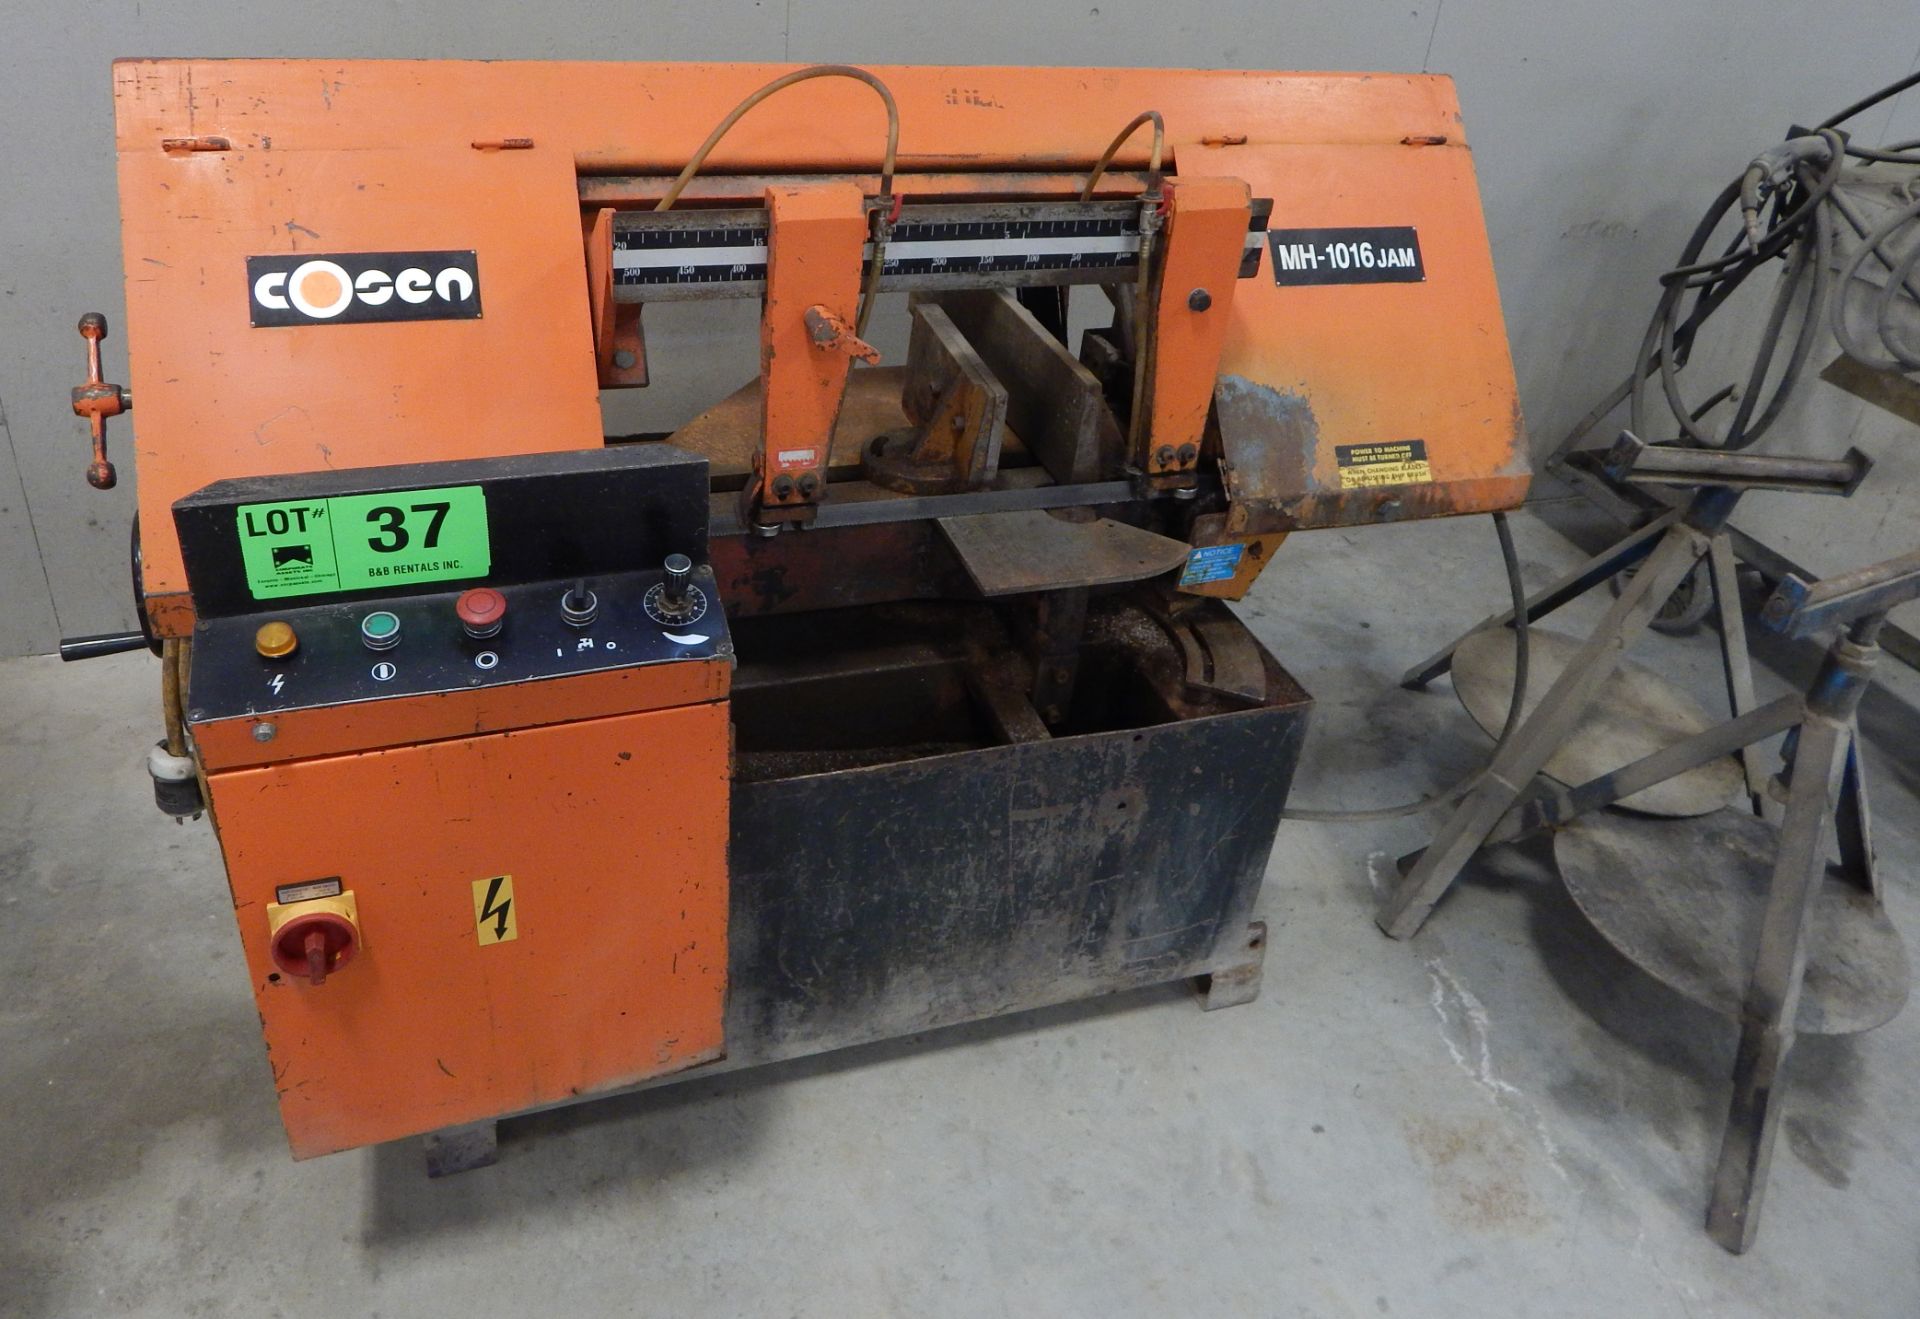 COSEN (2004) MH-1016JAM METAL CUTTING HORIZONTAL BAND SAW WITH MITER CAPABILITY S/N: 92010673 (CI)